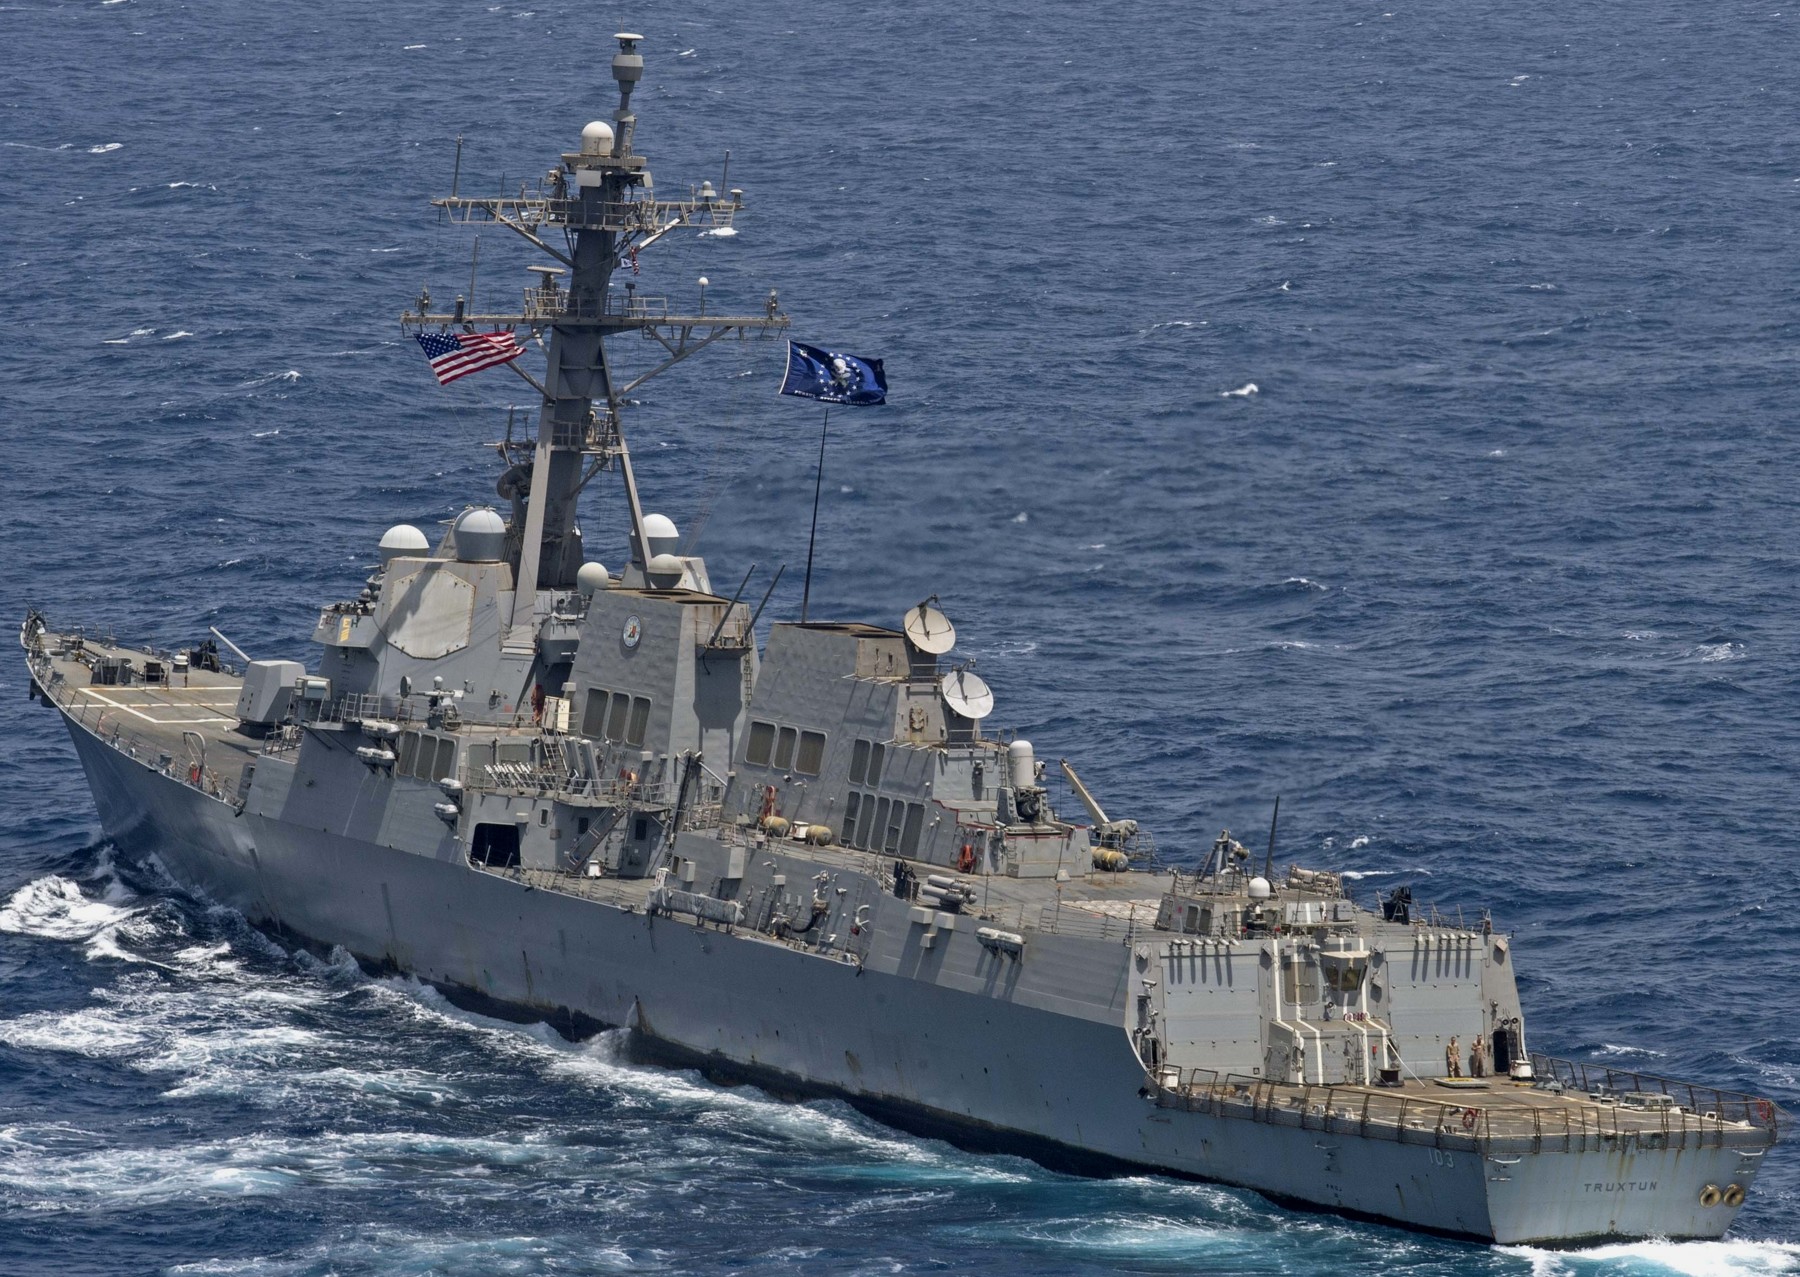 ddg-103 uss truxtun arleigh burke class guided missile destroyer aegis us navy red sea 04